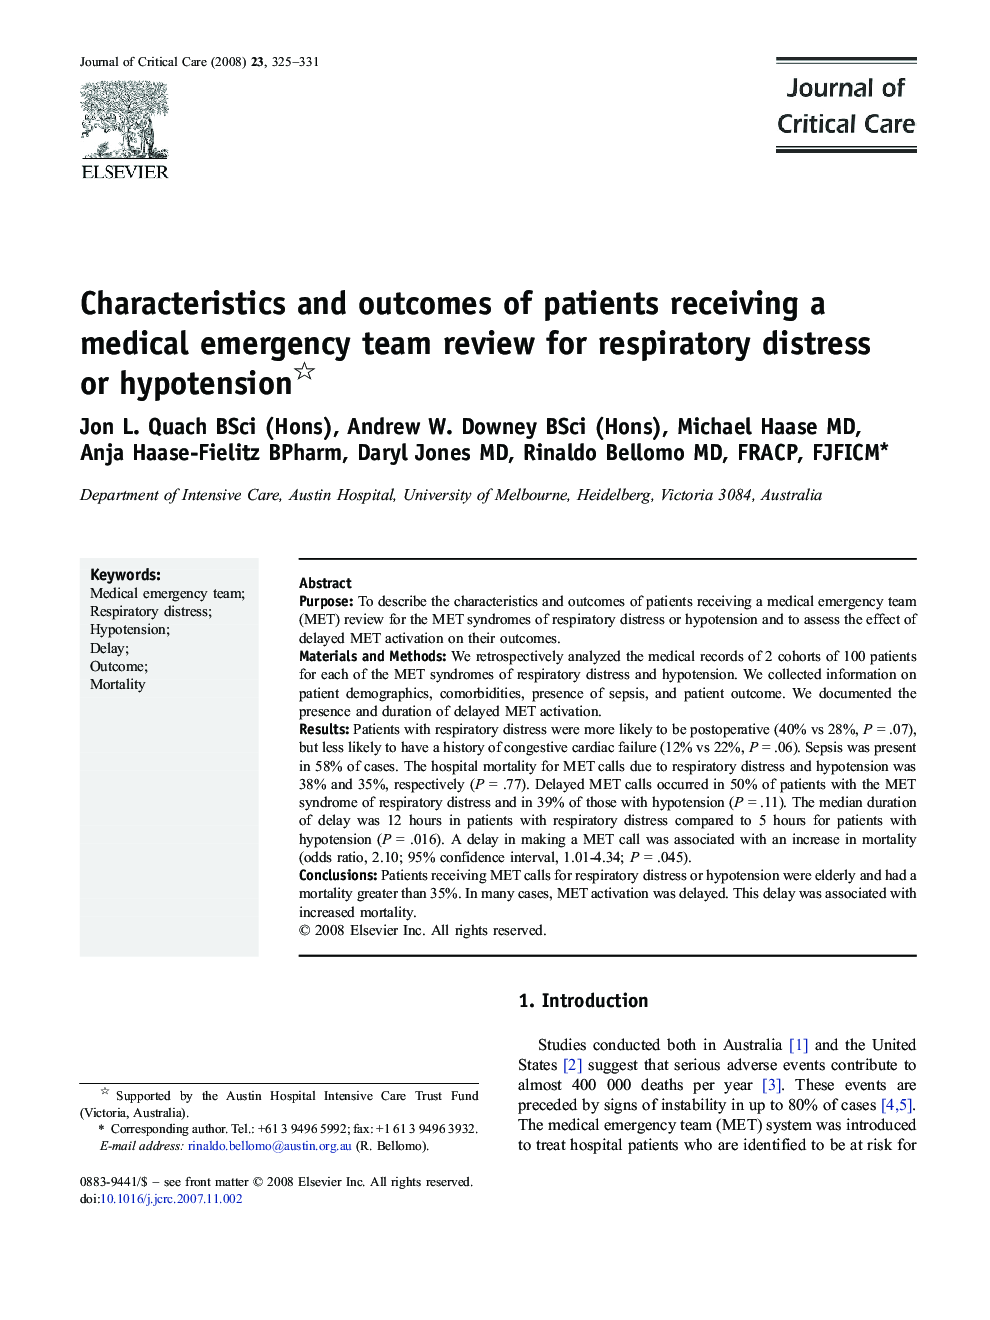 Characteristics and outcomes of patients receiving a medical emergency team review for respiratory distress or hypotension 